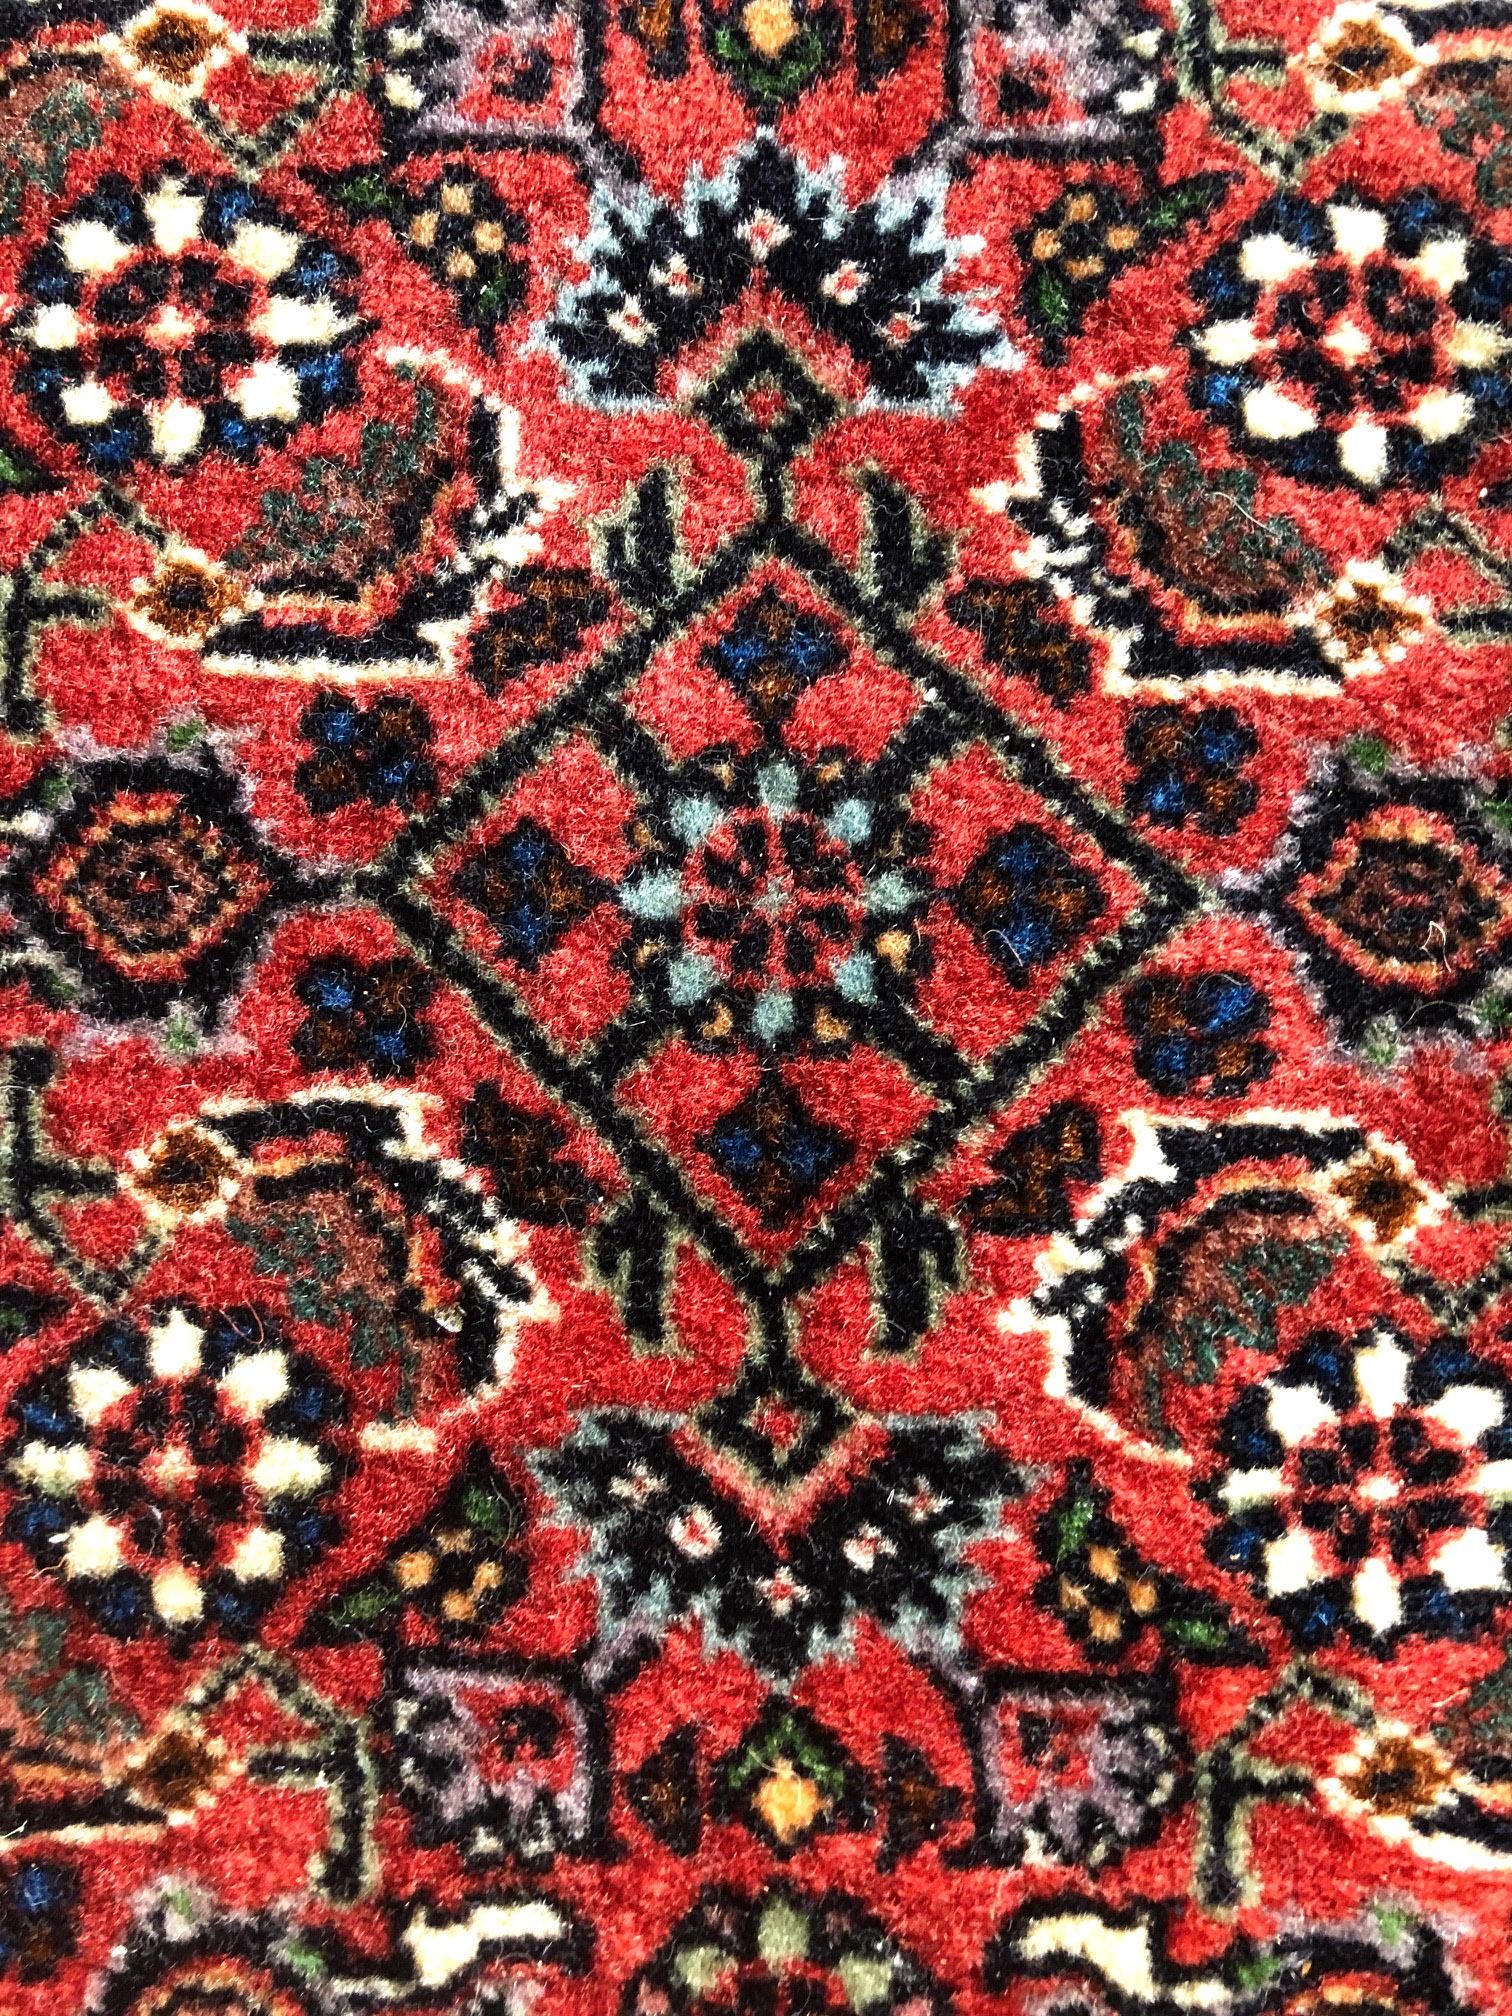 This piece is a handmade Persian rug. The pile is wool with cotton foundation, the pile is incredible dense and strong. This stunning Persian Bijar (Bukan) rug is among the most hardwearing rug. It is made using high-quality wool, and the knots are